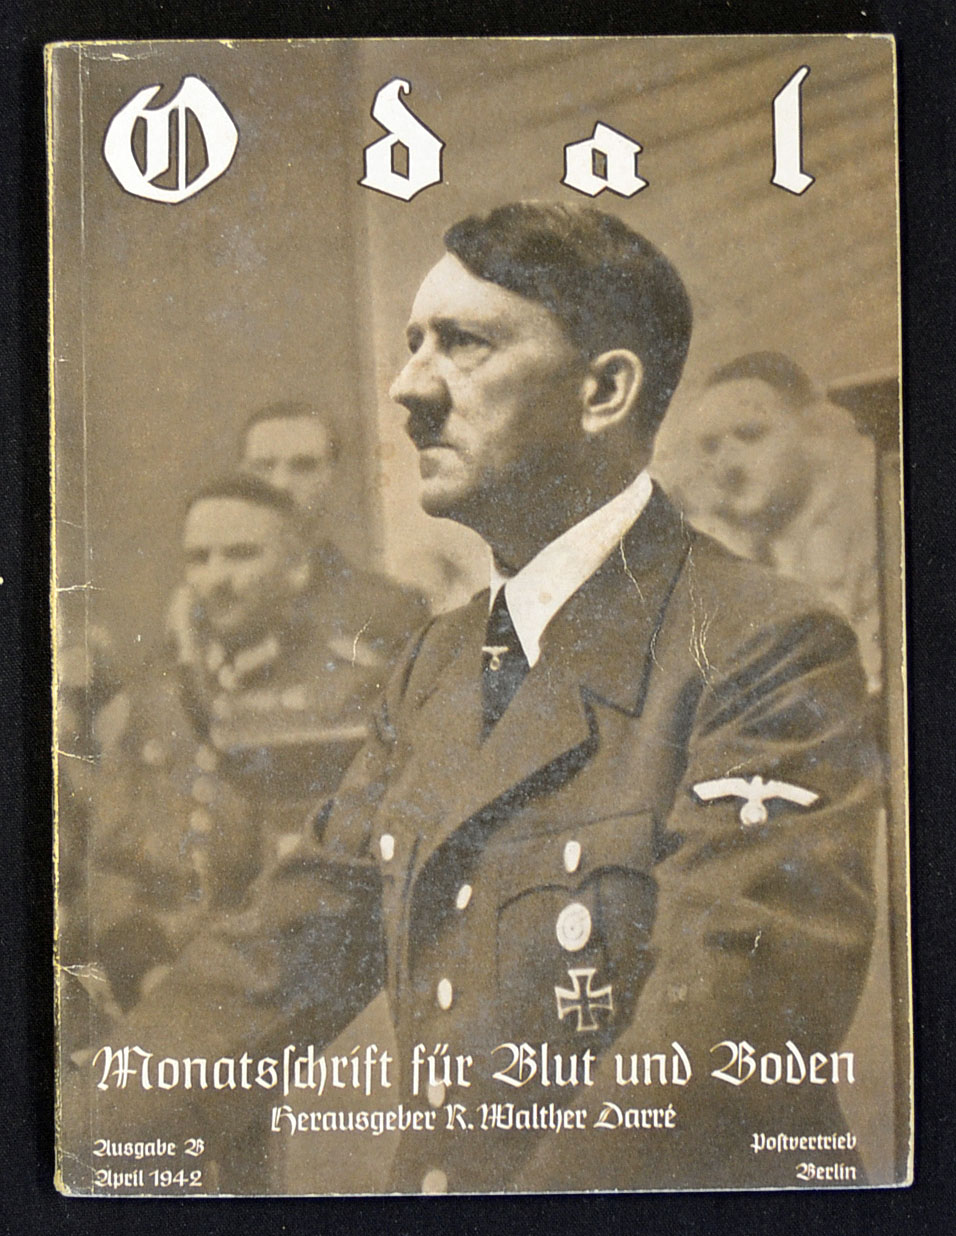 WWII Nazi Propaganda Publication Odal Monatsschrift fur Blut and Boden [Monthly magazine for blood